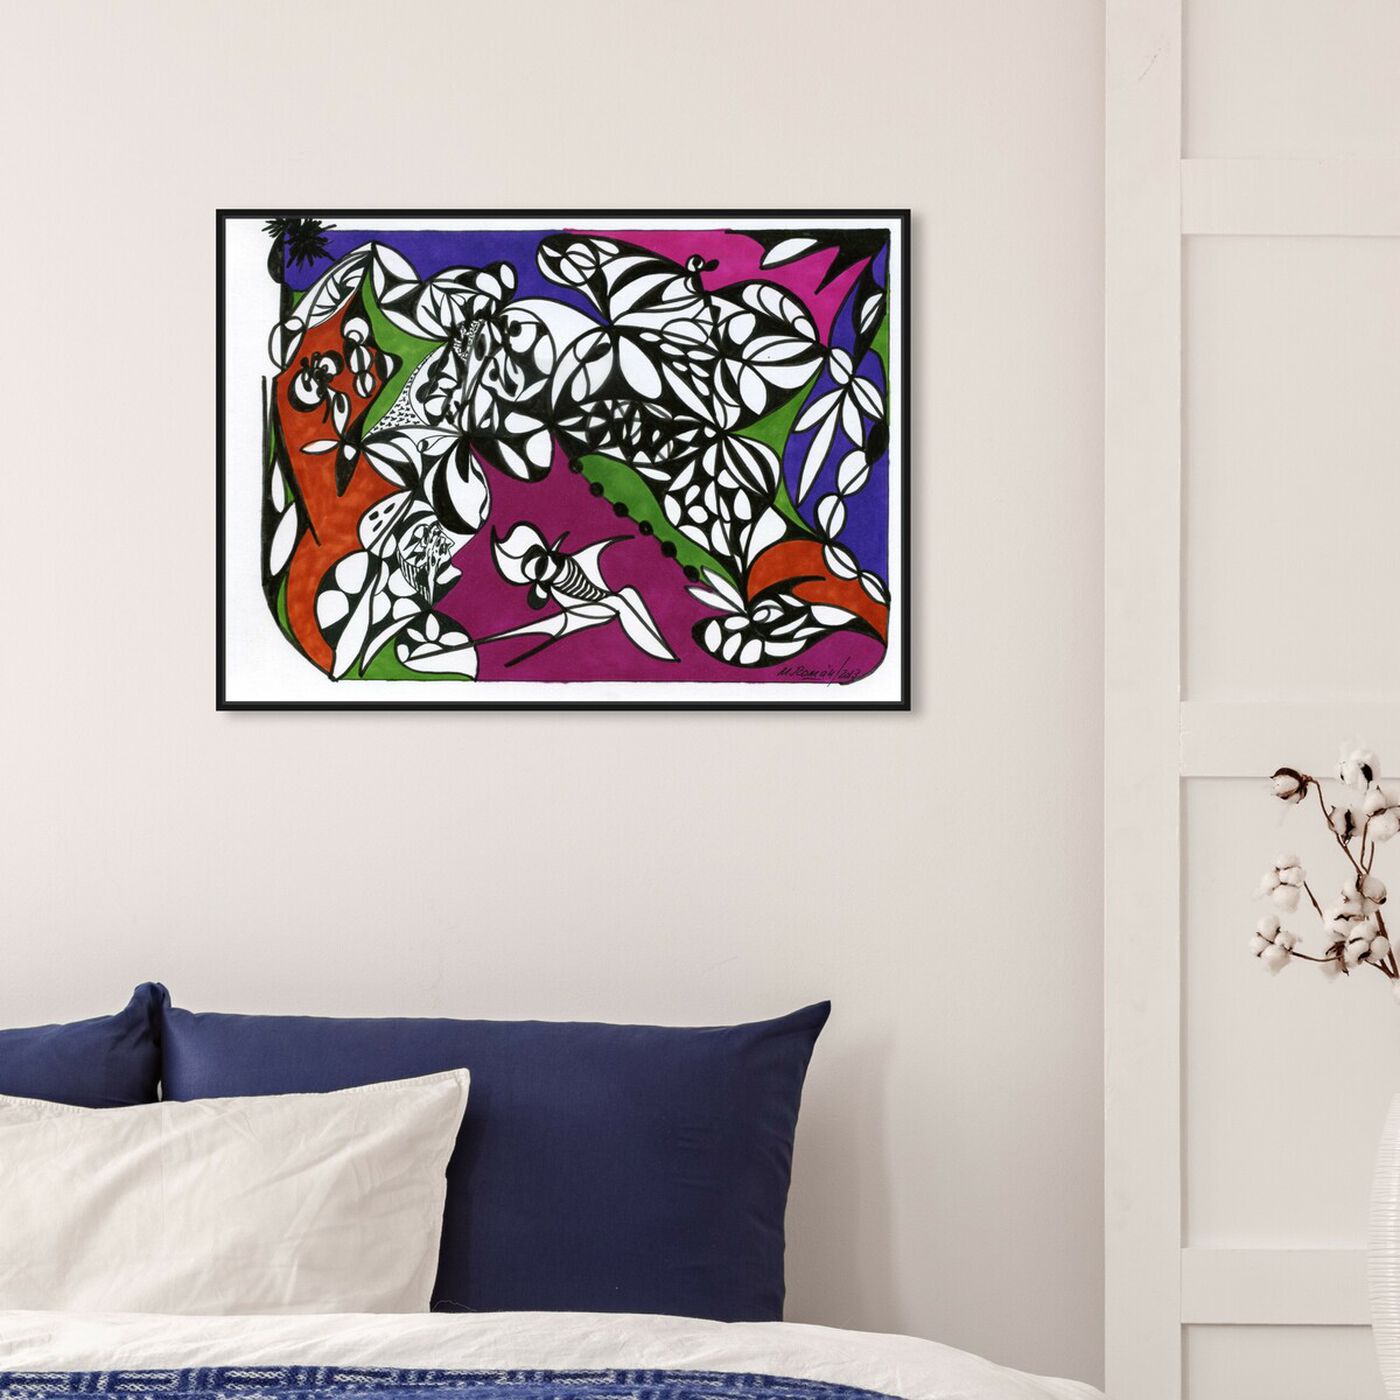 Hanging view of Descent featuring abstract and shapes art.